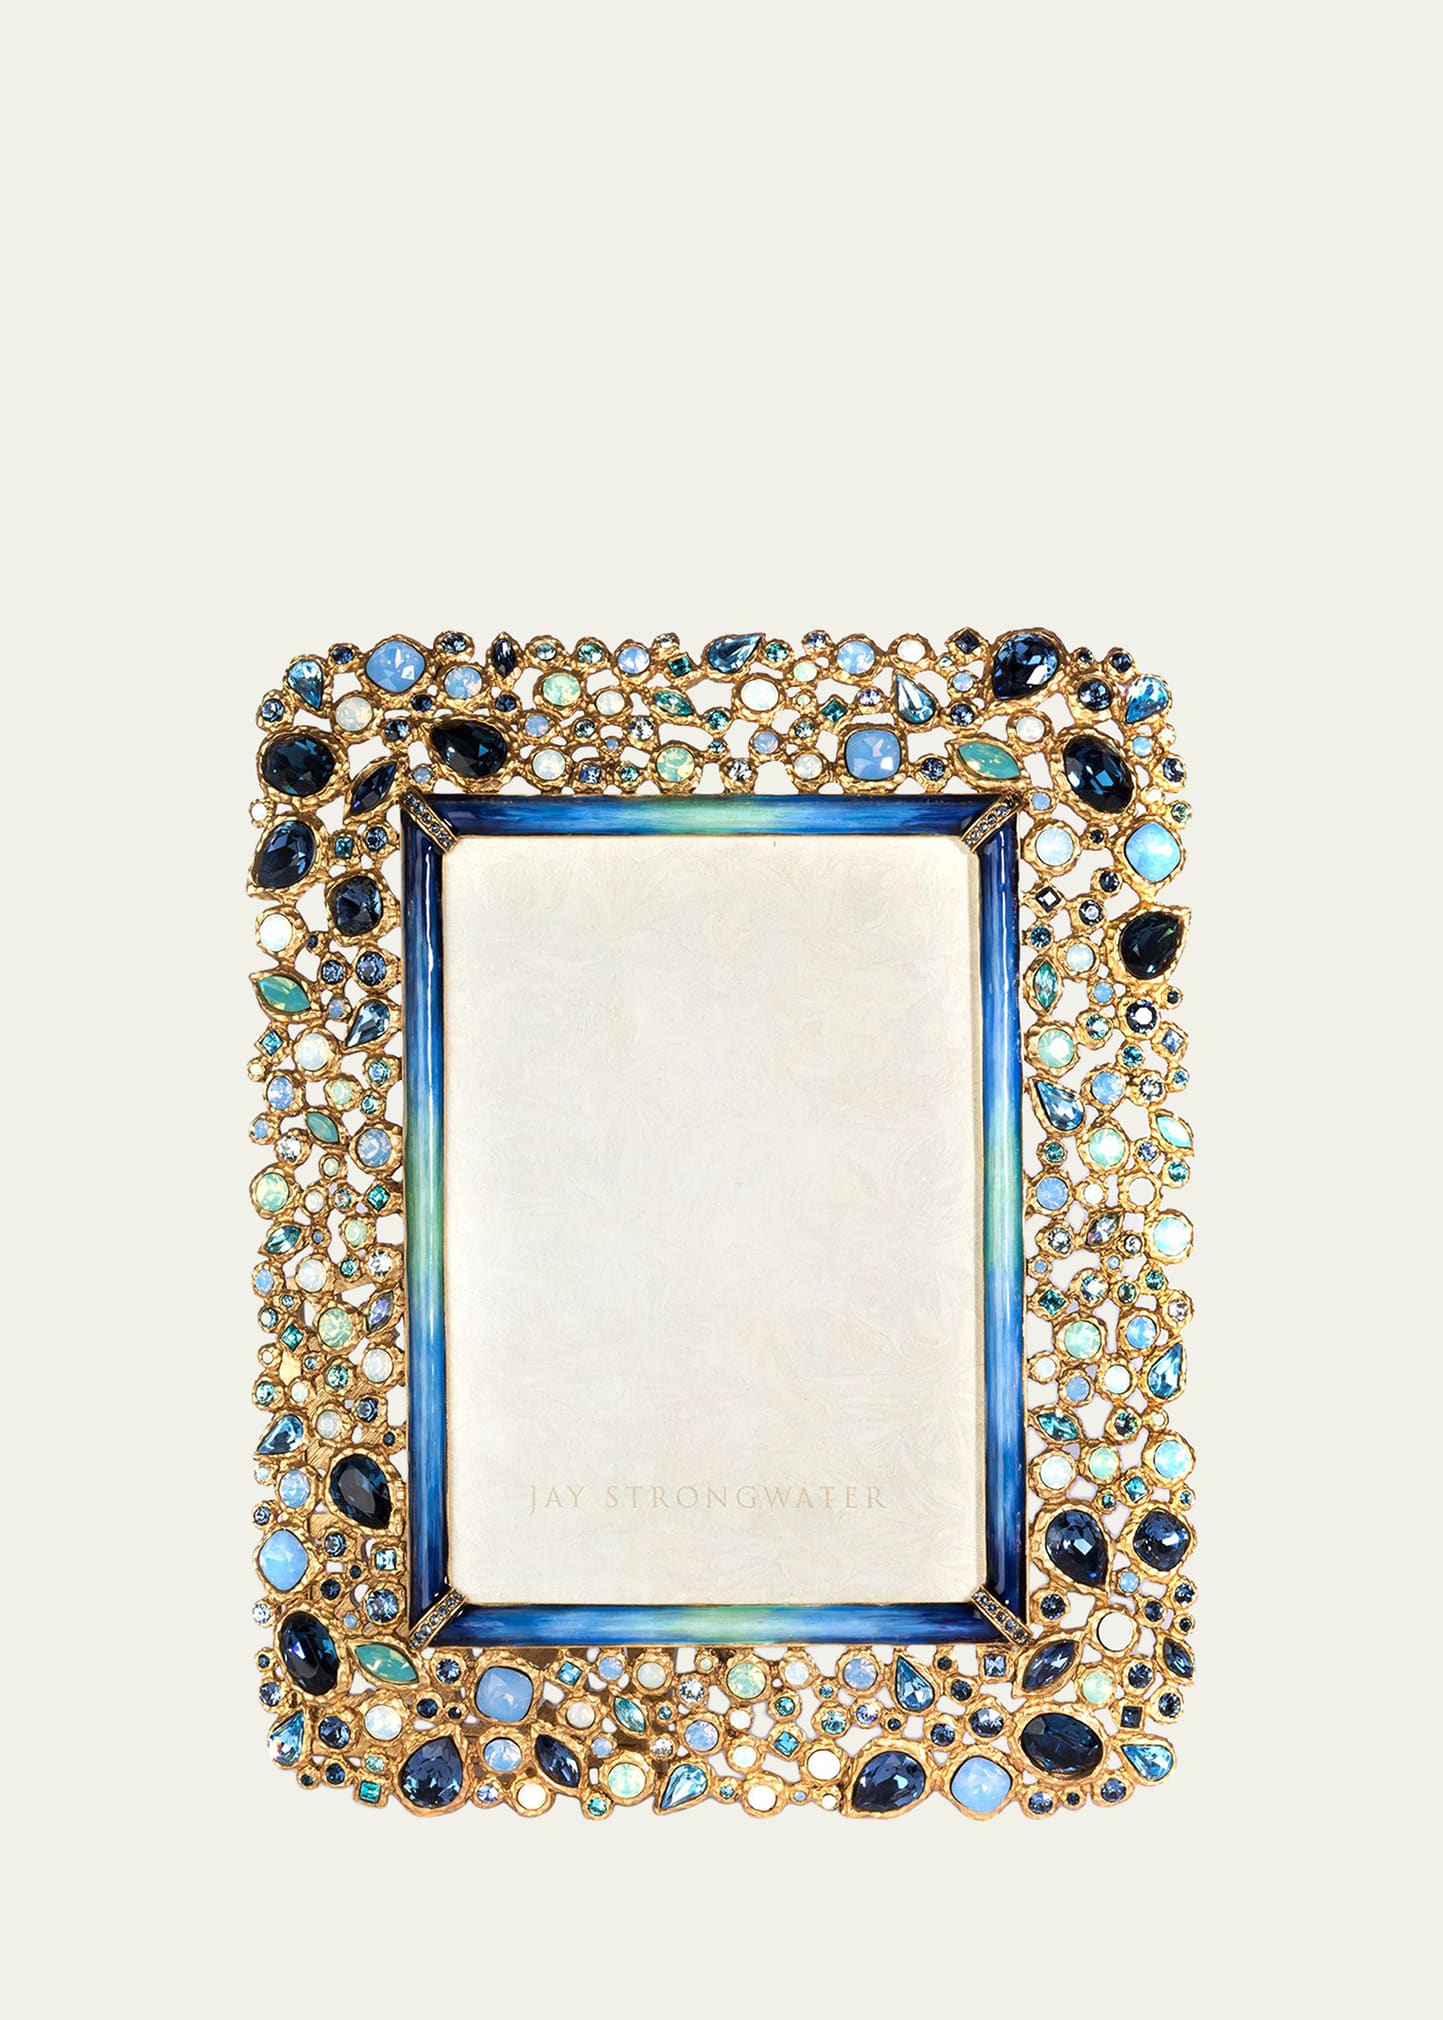 Javier Bejeweled Picture Frame, 5" x 7"